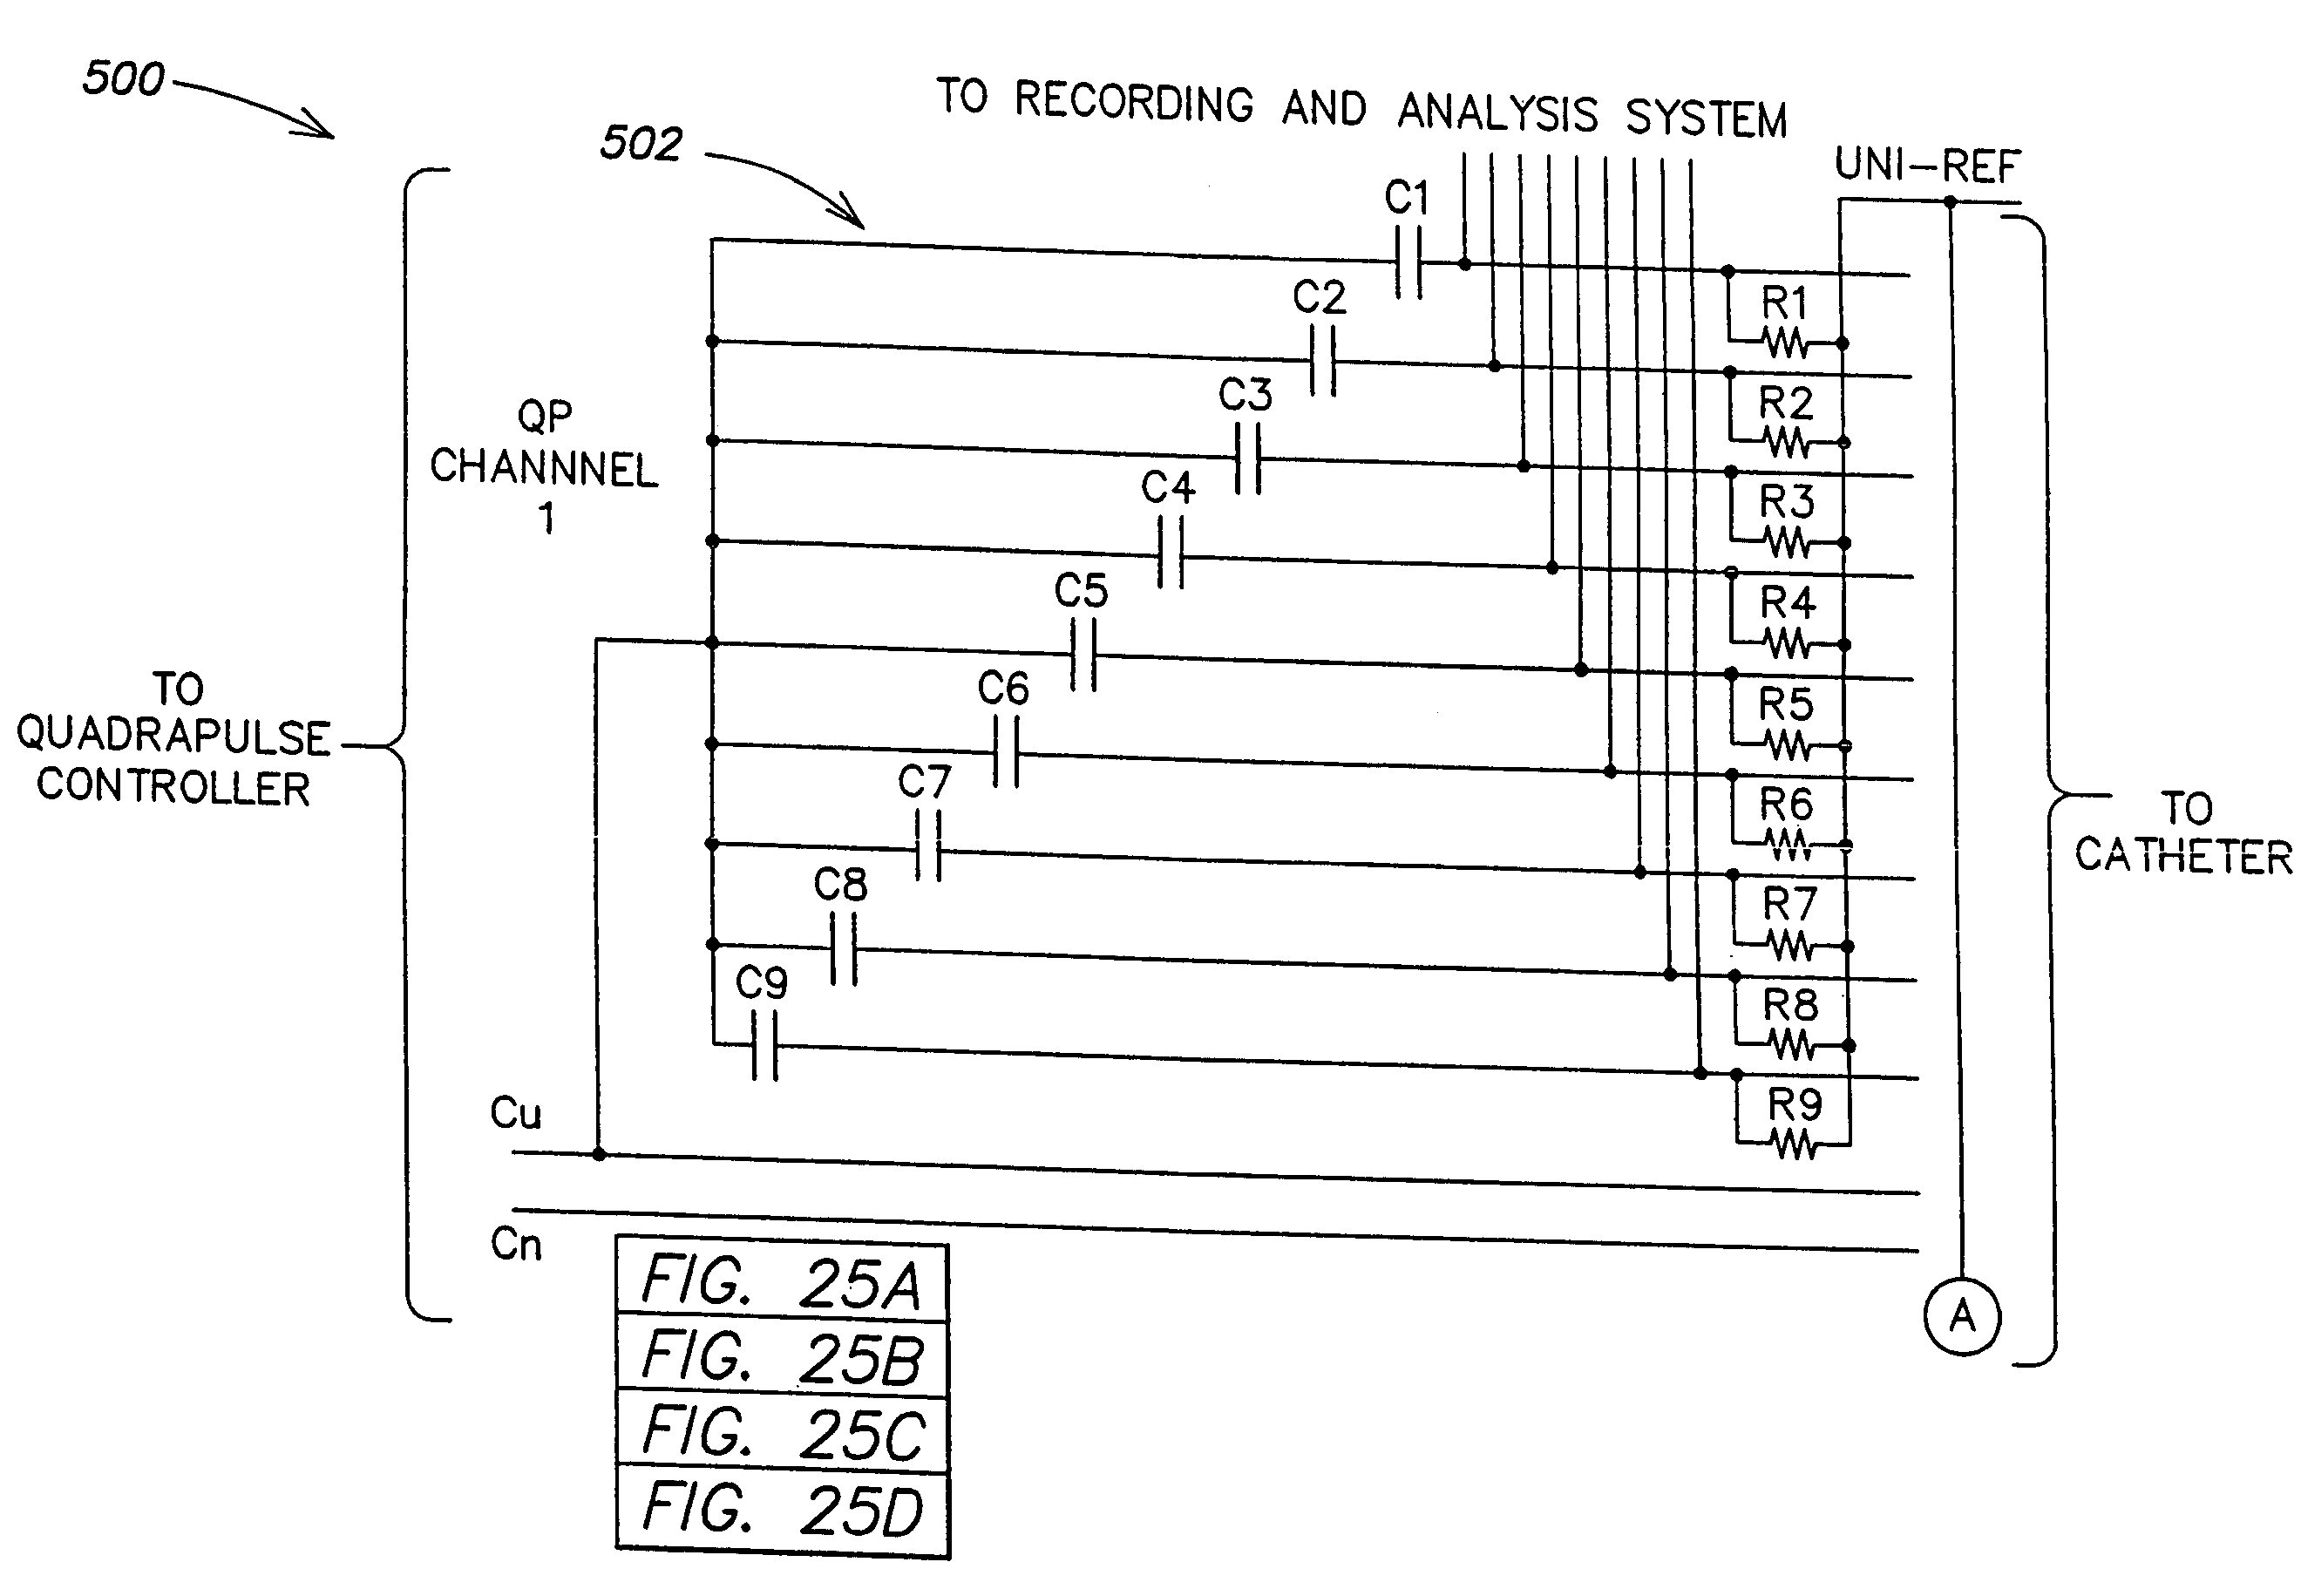 Method and apparatus for control of ablation energy and electrogram acquisition through multiple common electrodes in an electrophysiology catheter